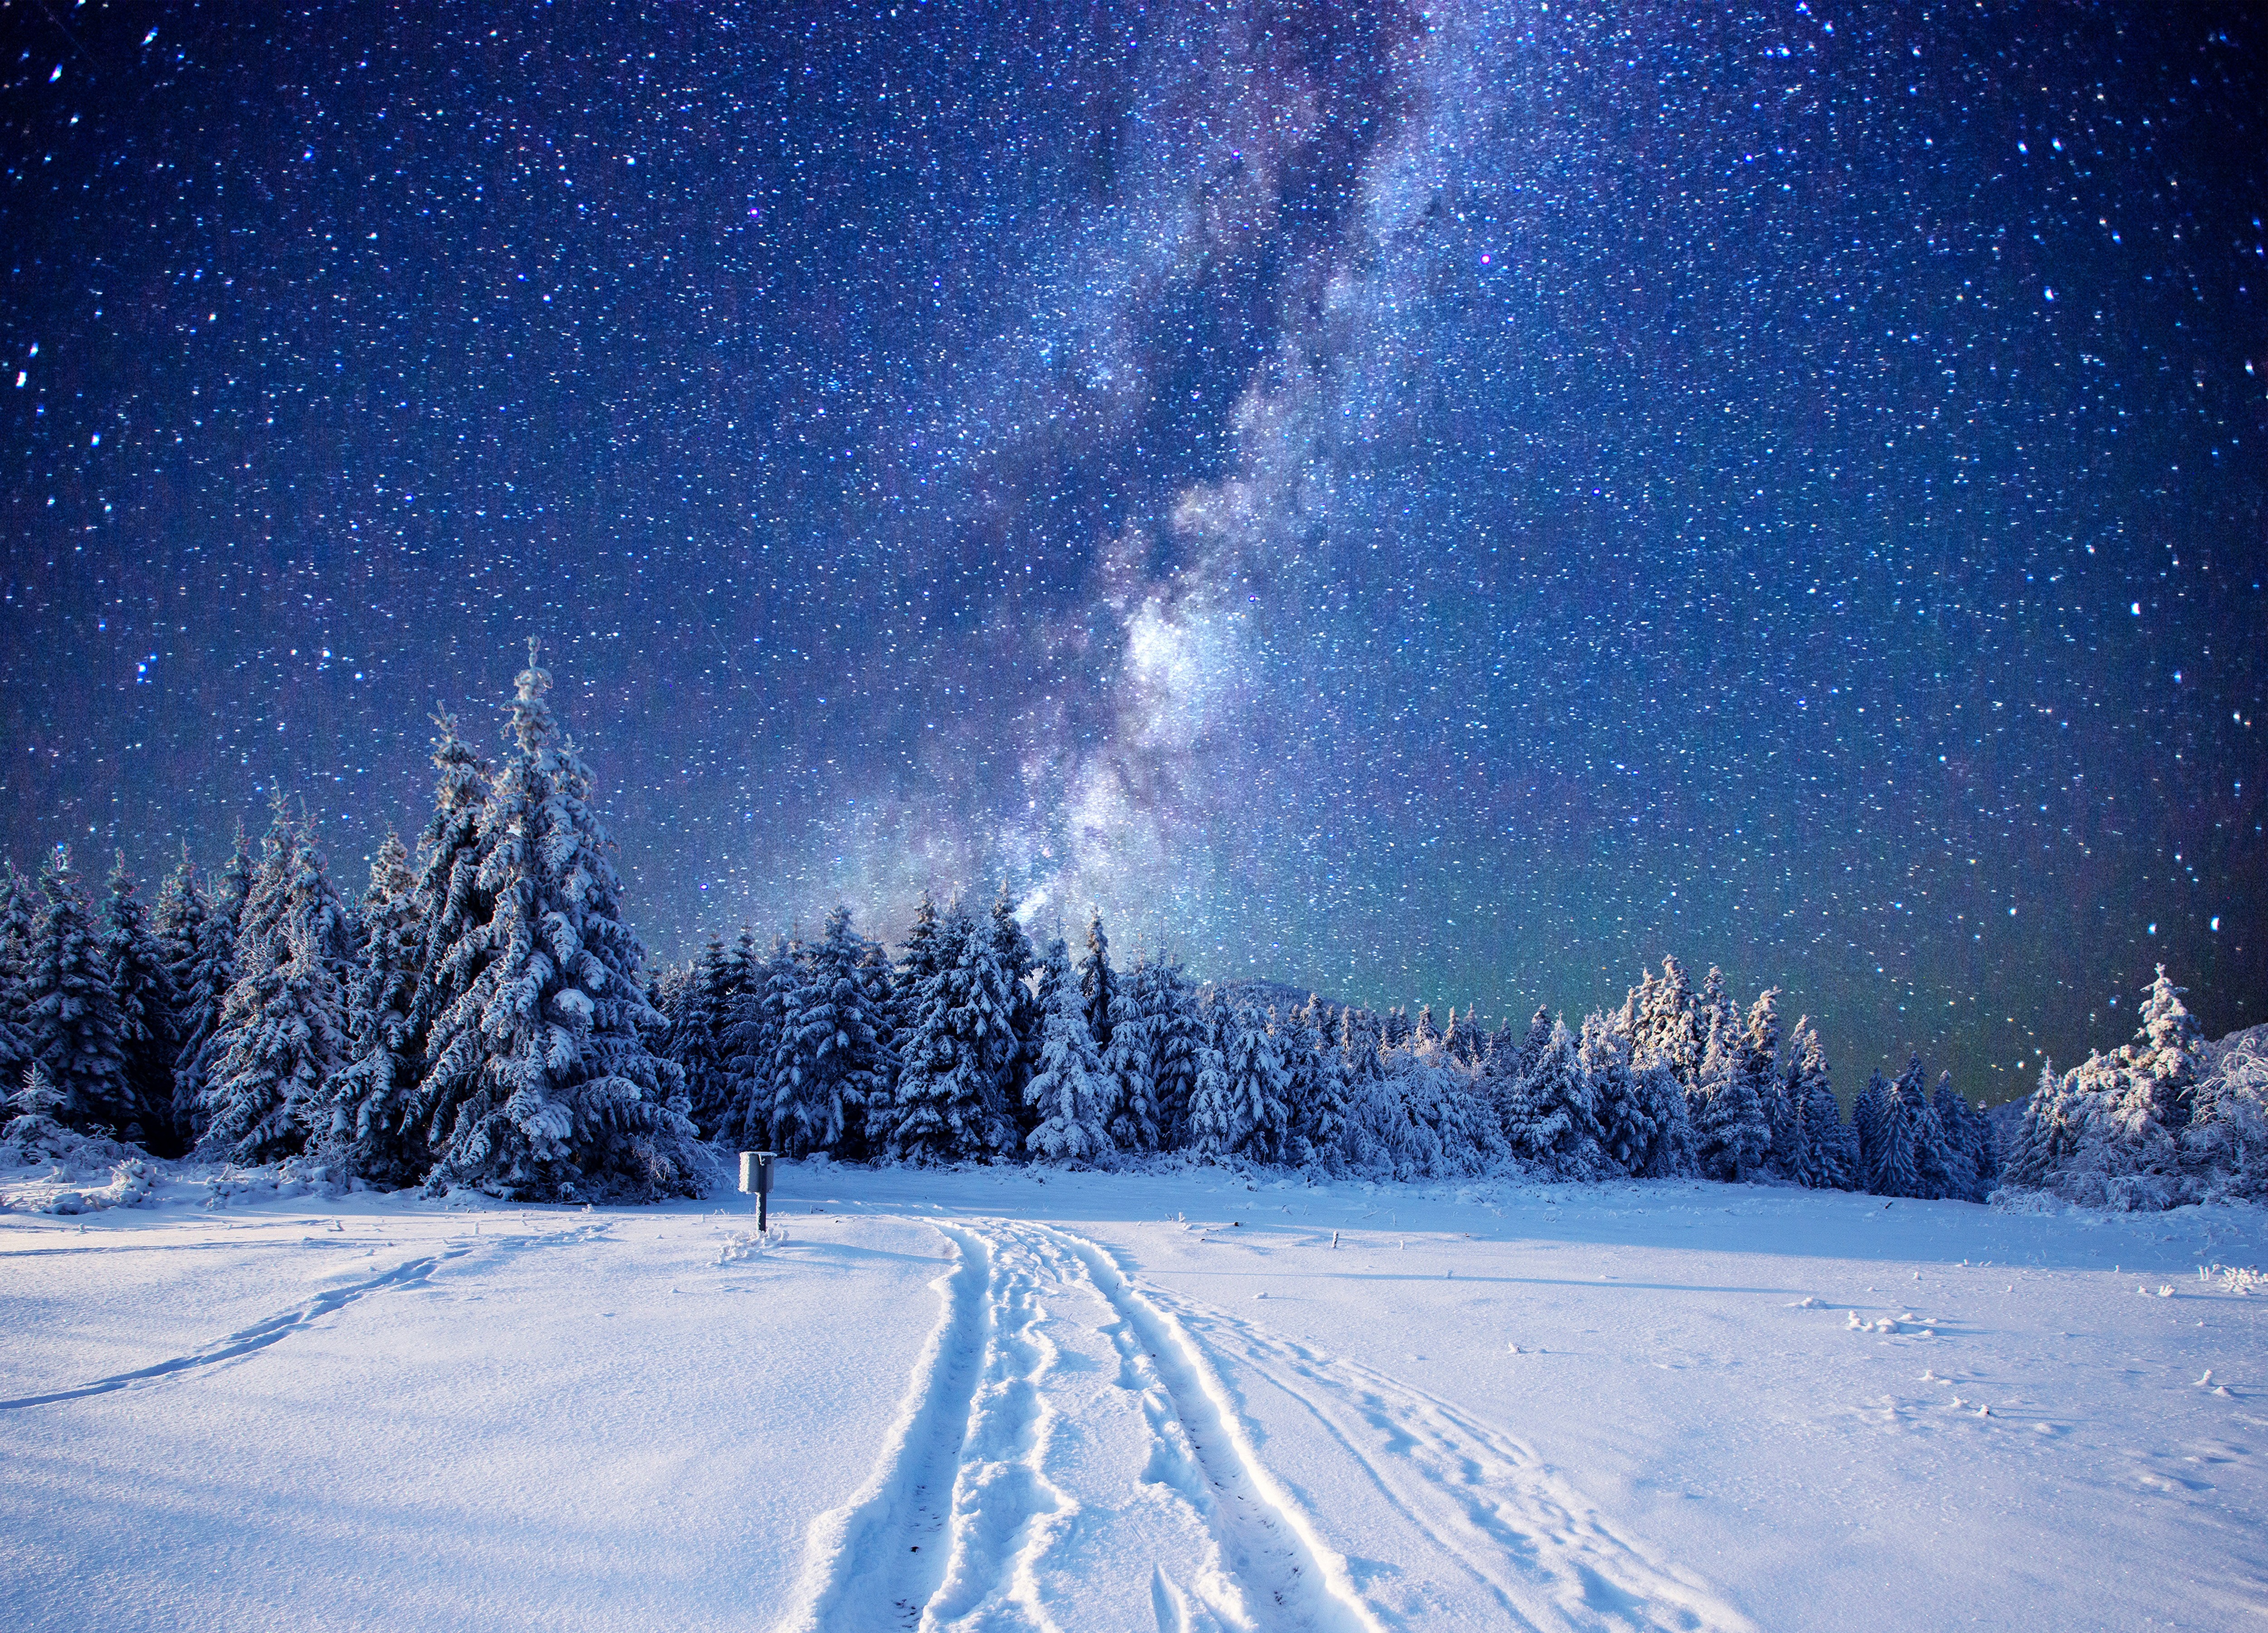 General 5000x3600 pine trees snow landscape stars winter starred sky forest nordic landscapes sky ice cold outdoors trees